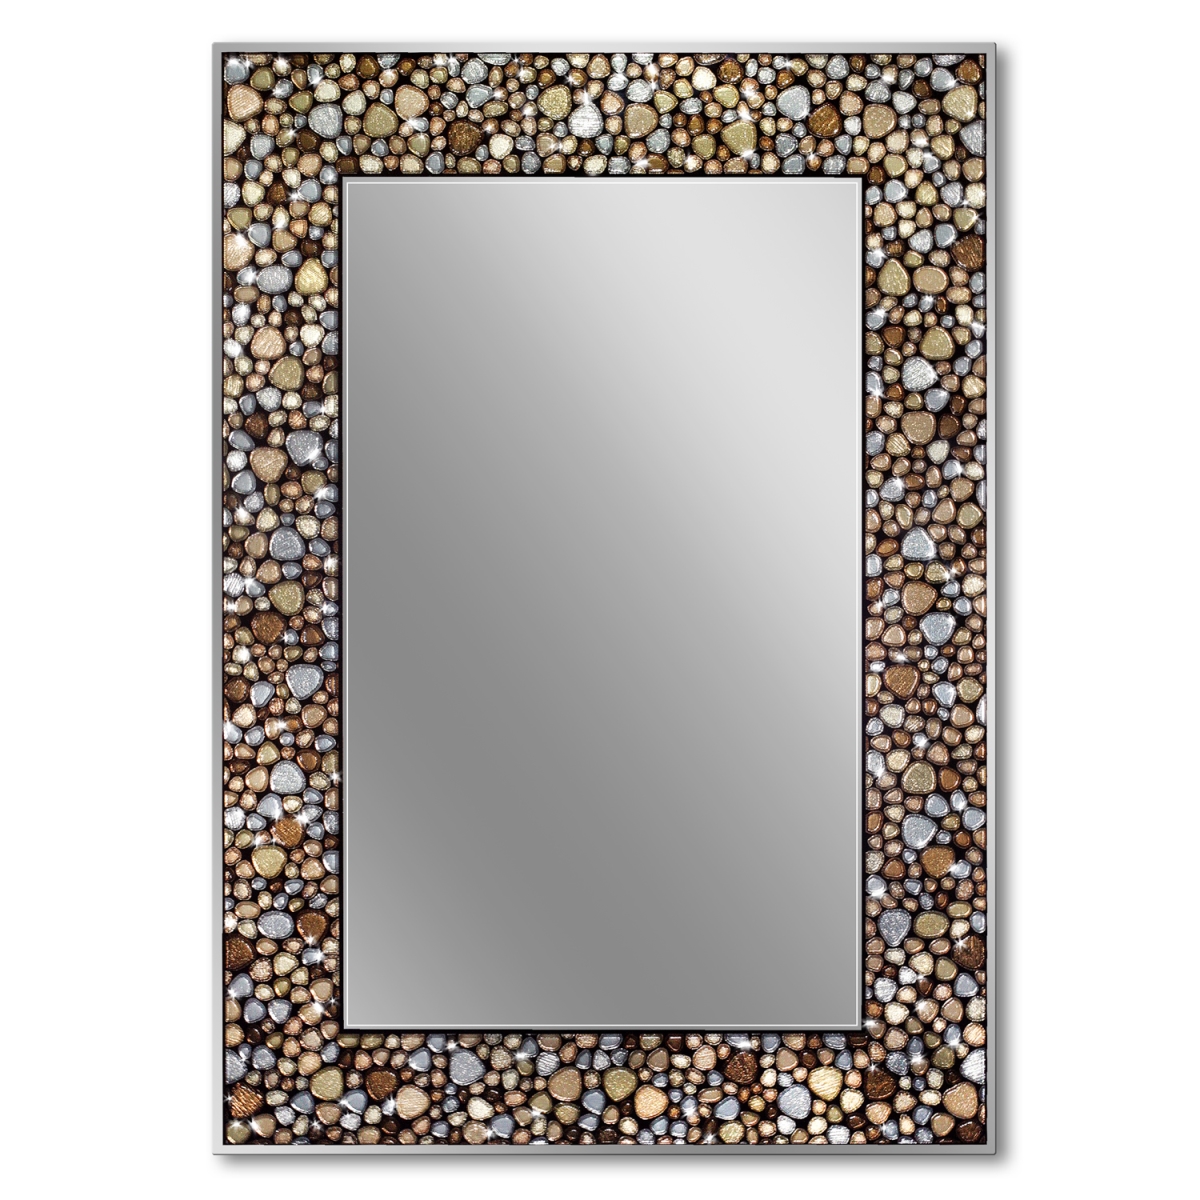 Head West 8125 22 X 32 In. Frameless Pebble Glass Mosaic Wall Mirror - Rectangle